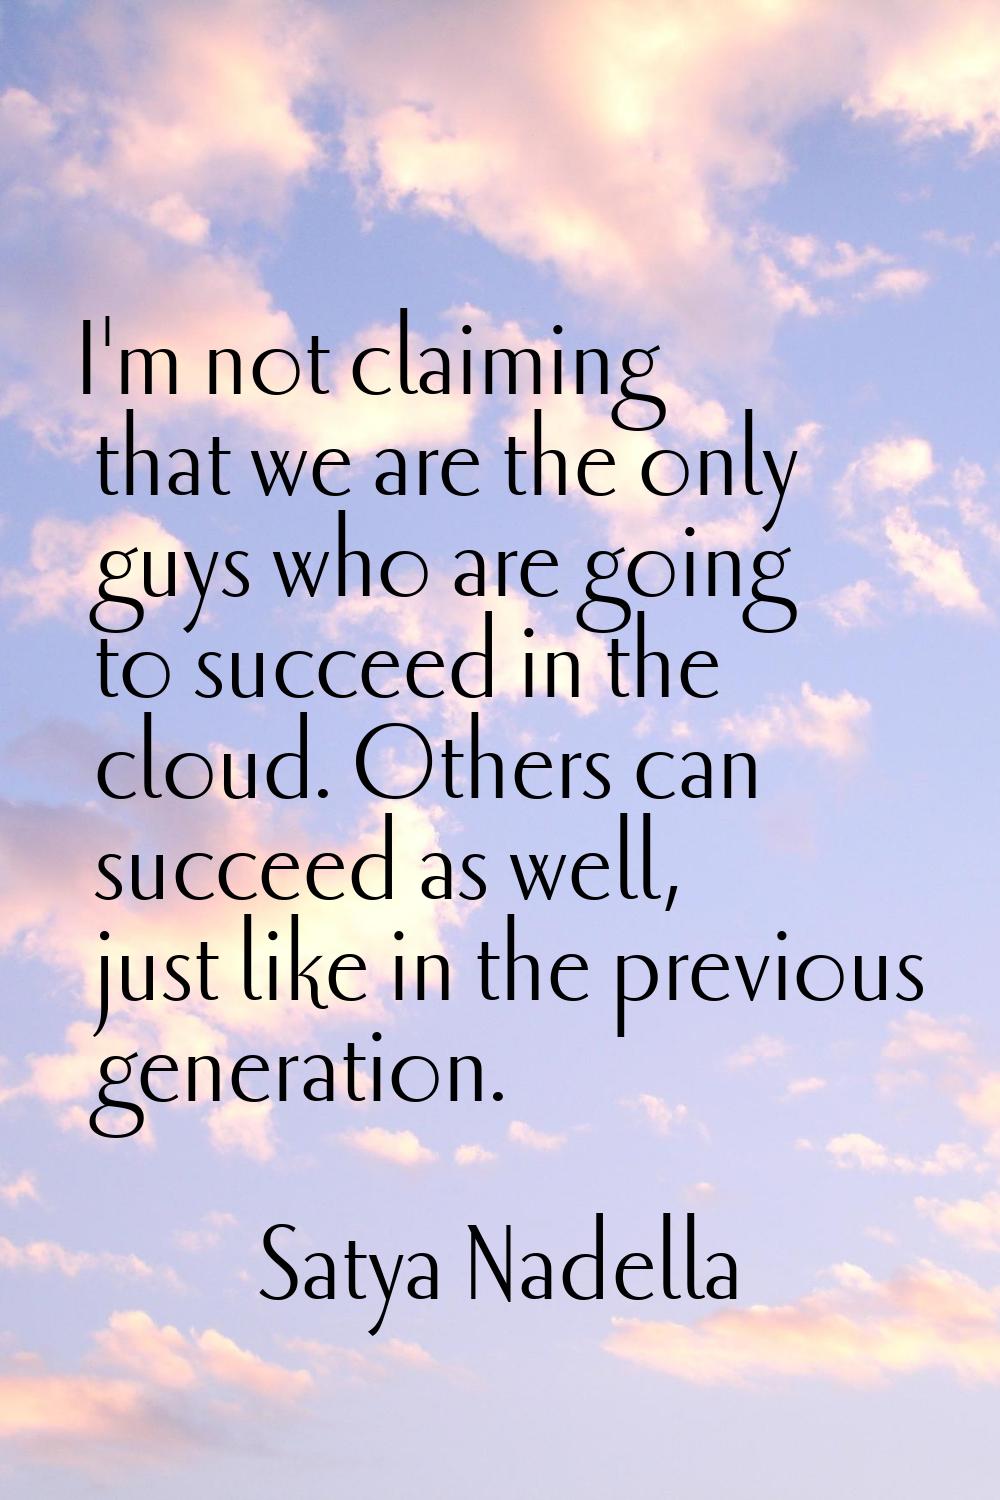 I'm not claiming that we are the only guys who are going to succeed in the cloud. Others can succee